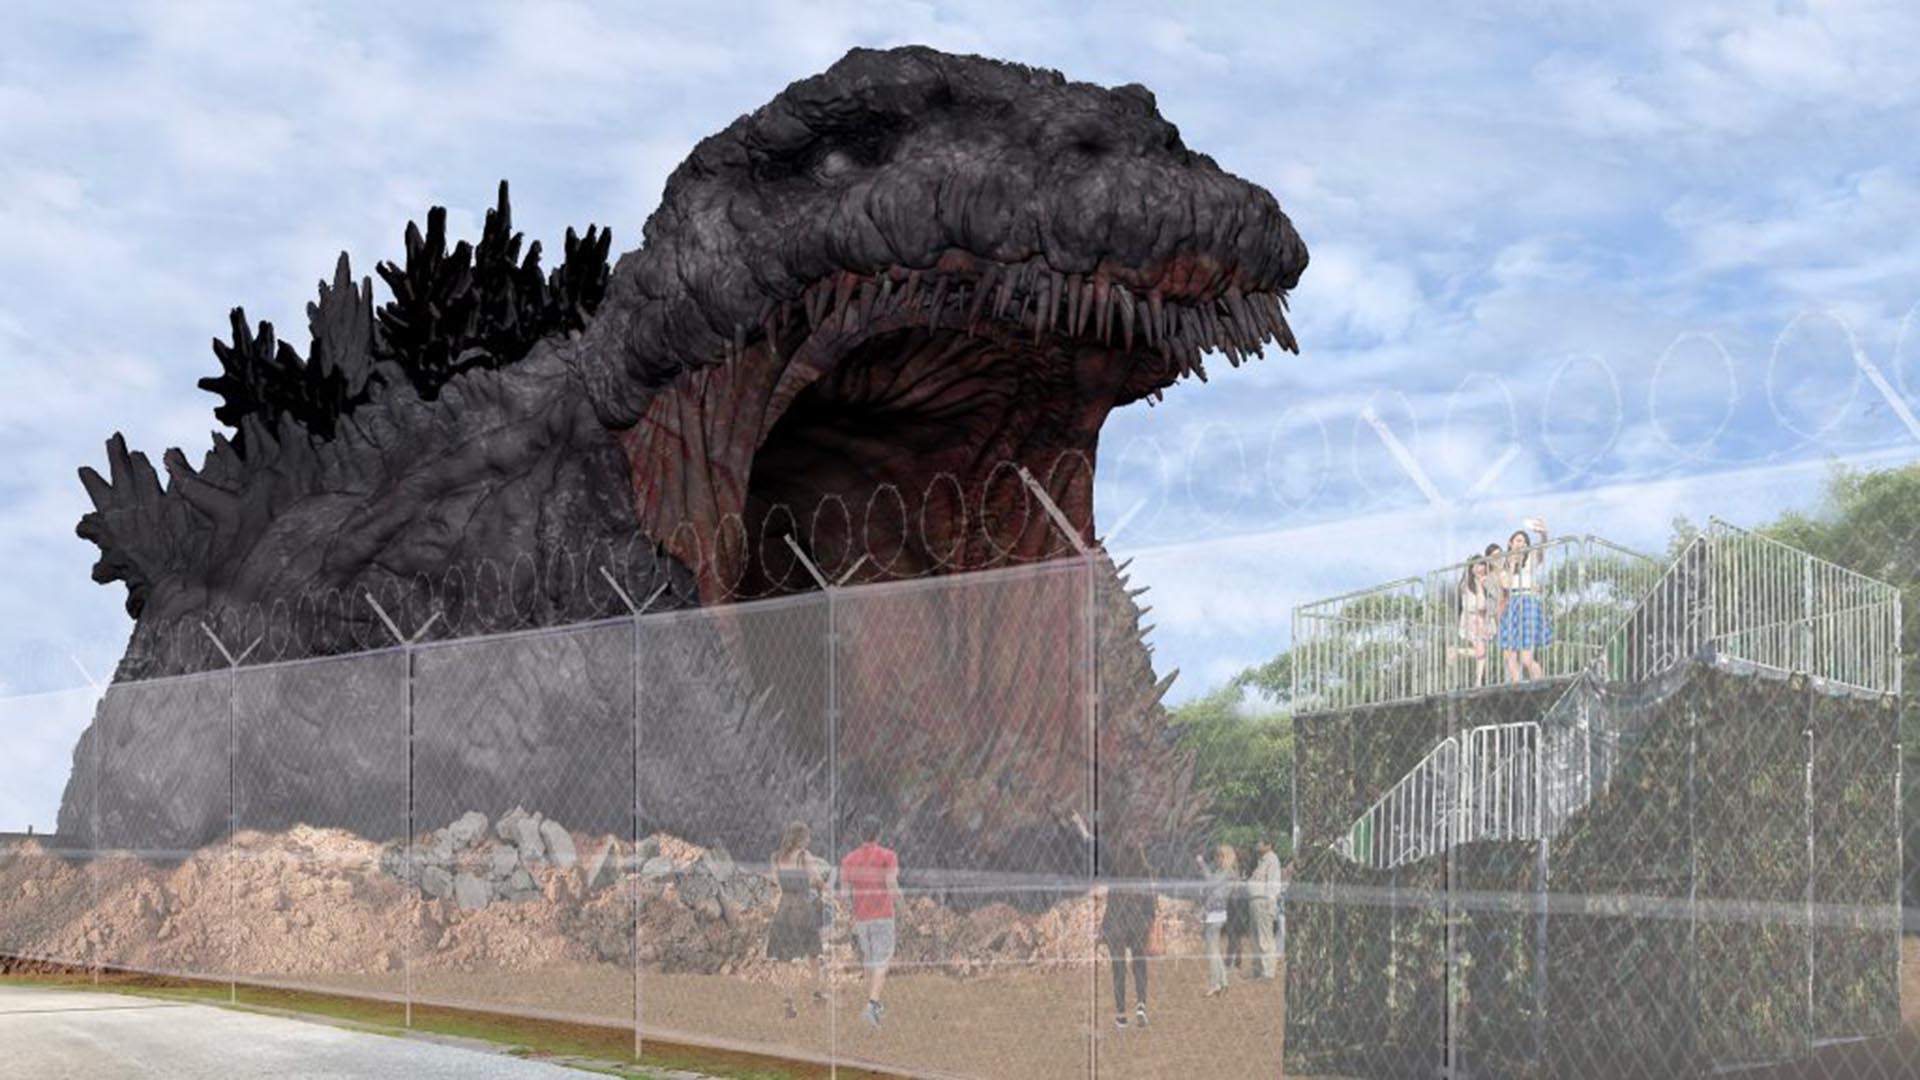 You'll Soon Be Able to Zoom Into a Life-Sized Godzilla Statue Via Zipline